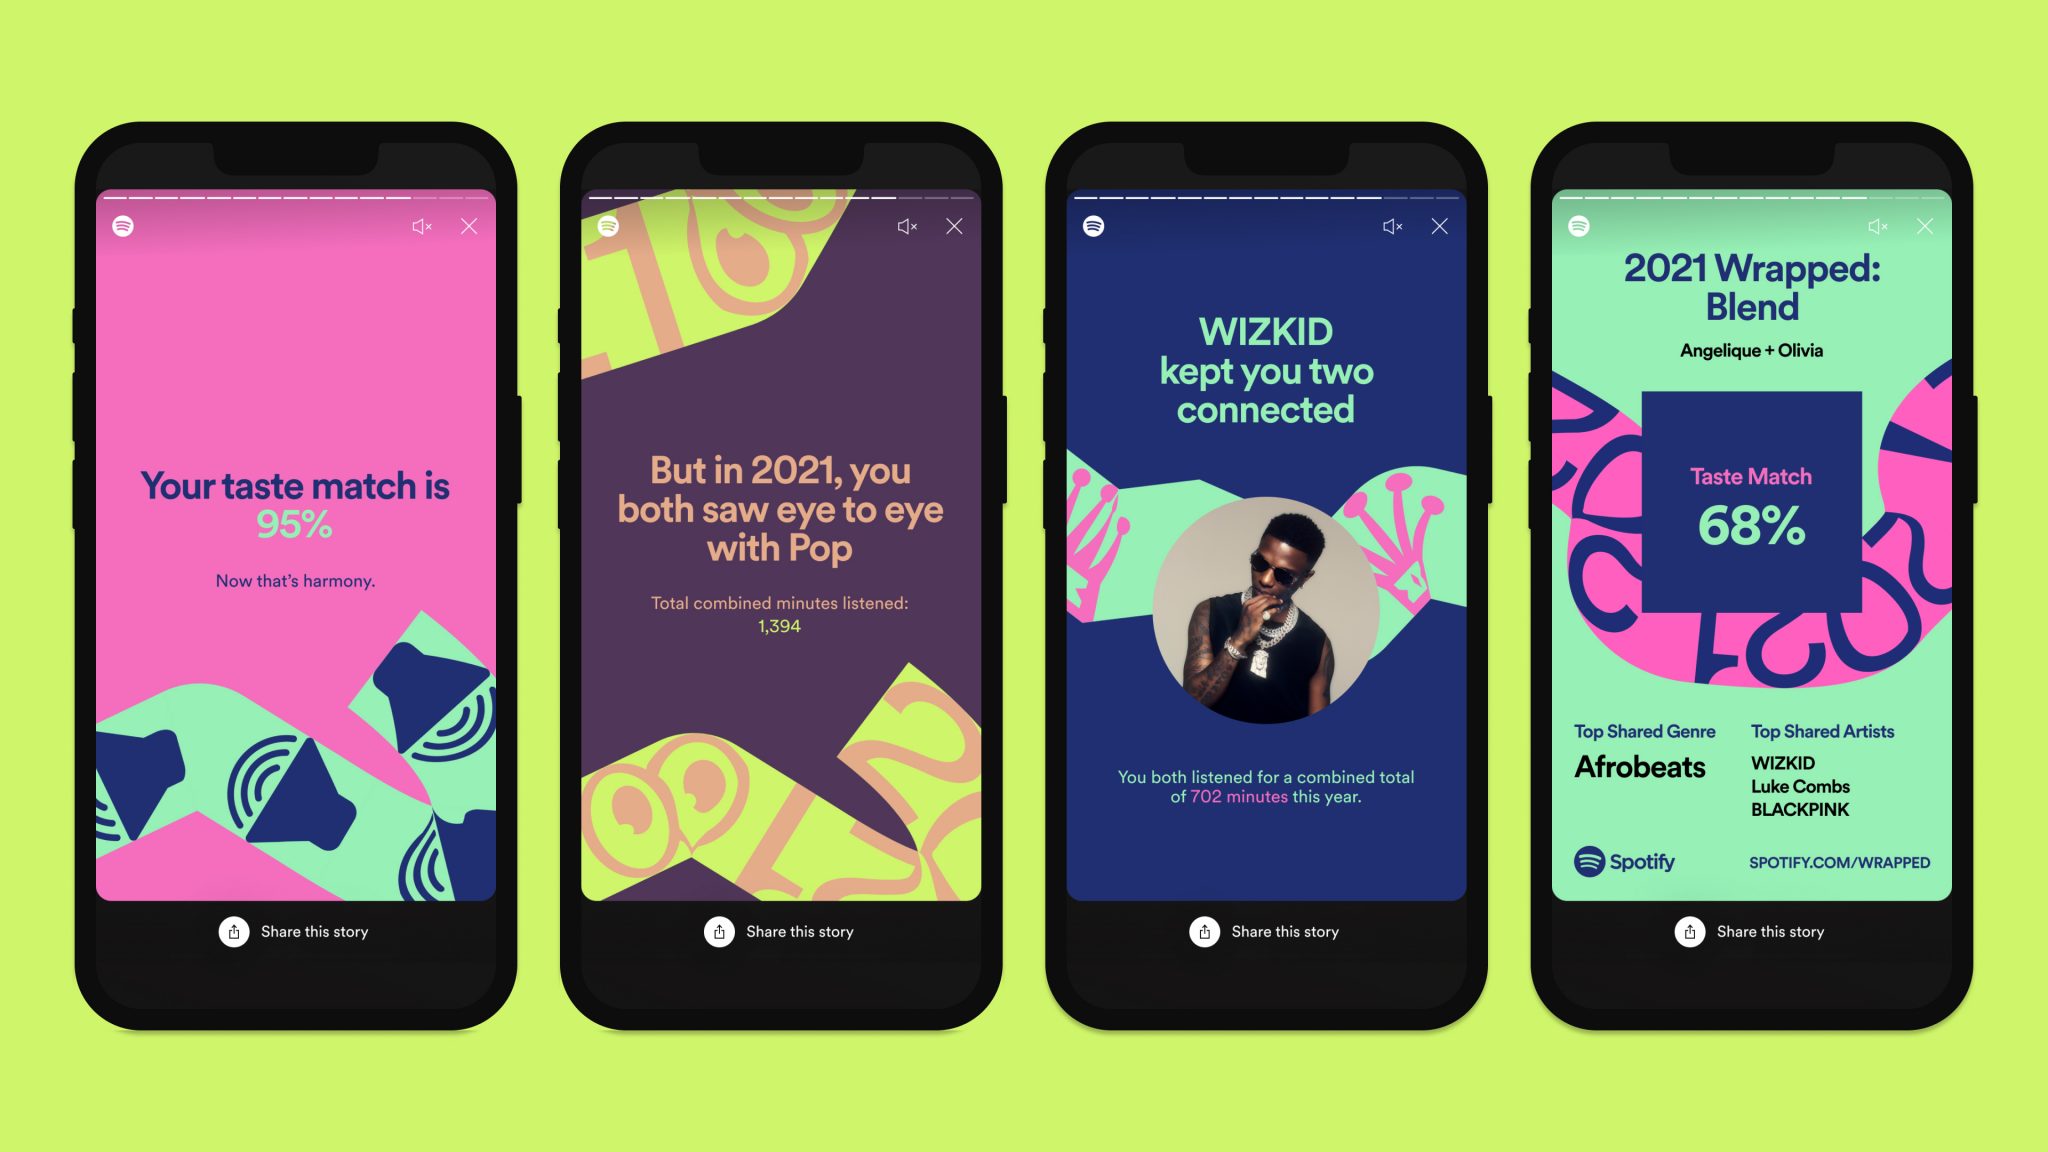 Spotify unveil 2021 Wrapped – your personalized round-up of your most listened to artists, genres, songs, podcasts and more